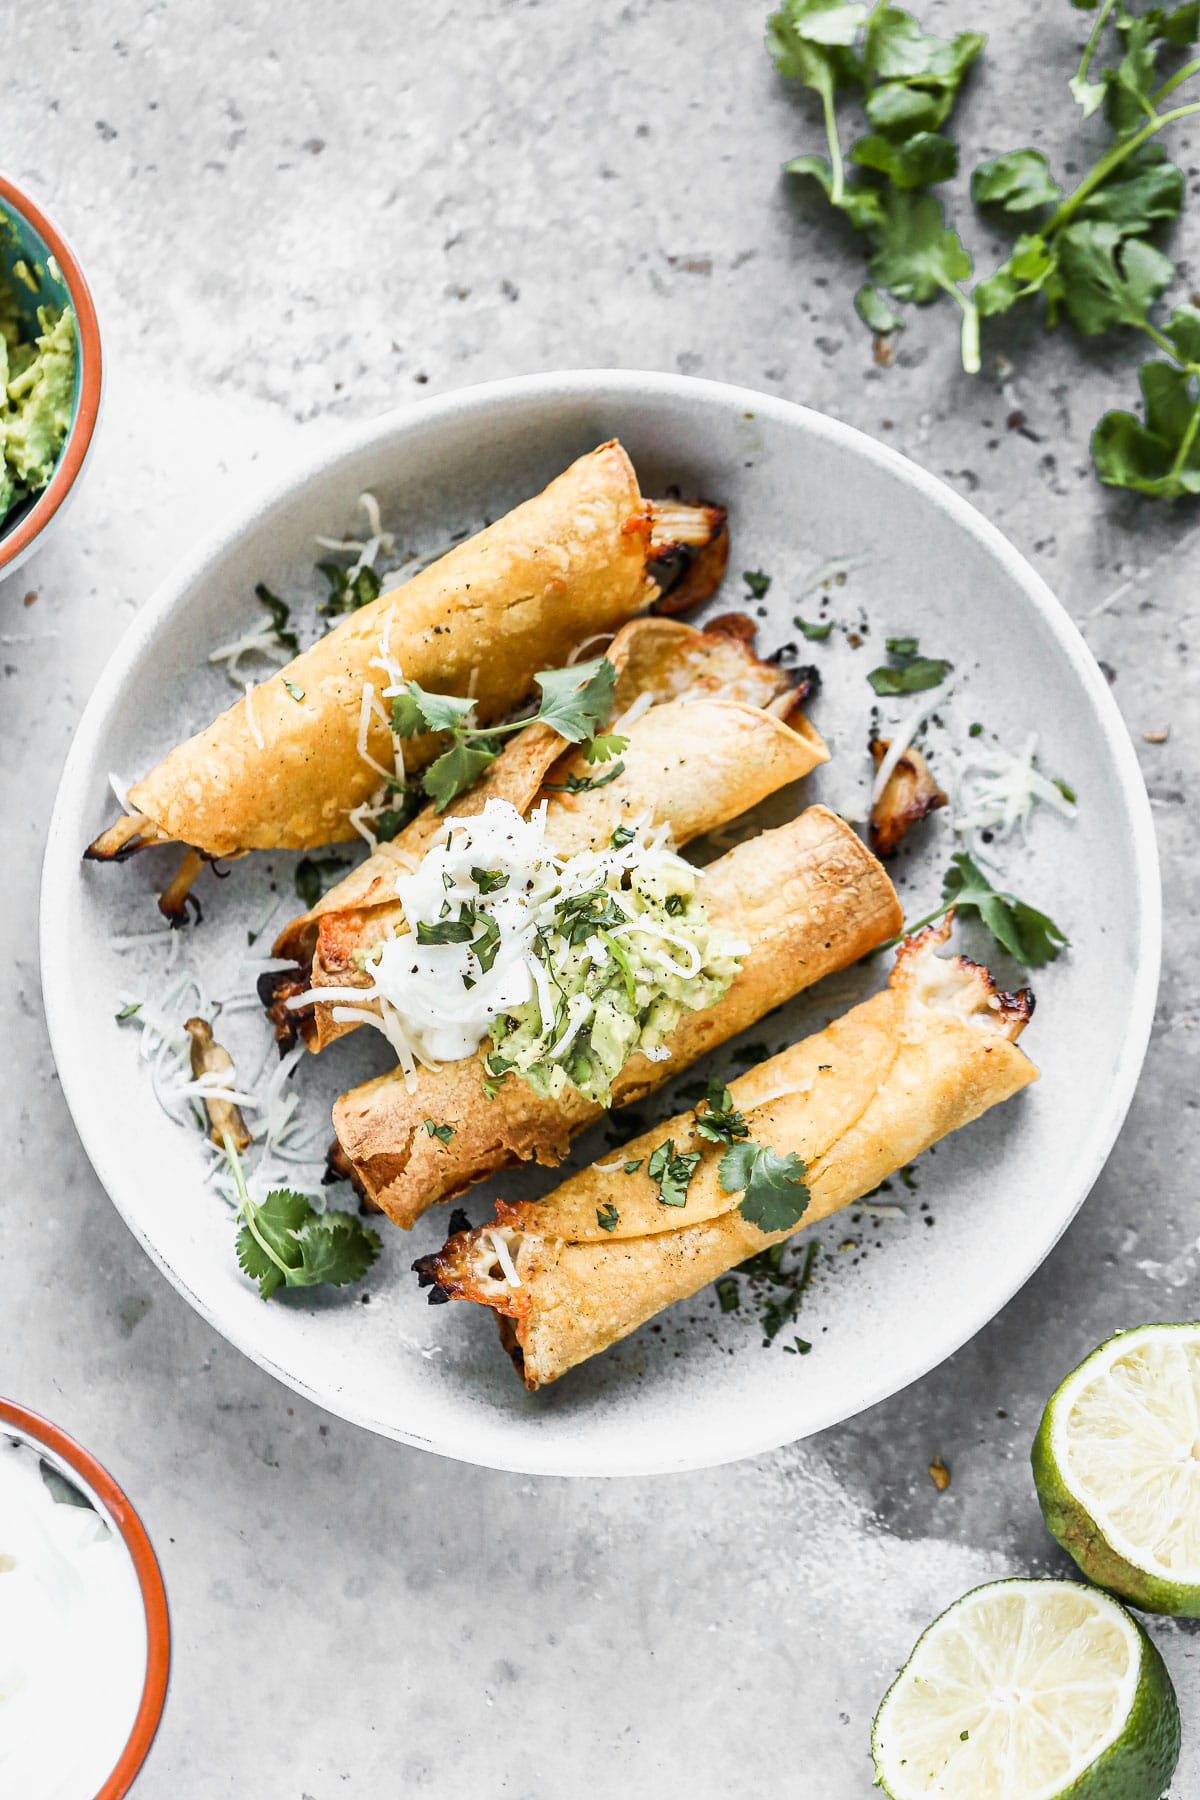 Irresistibly crispy on the outside and filled with shredded honey lime chicken and plenty of melted monterey jack cheese on the inside, our Air Fryer Taquitos are the perfect Game Day snack. Serve with an easy guac and lime sour cream to finish them off.&nbsp;